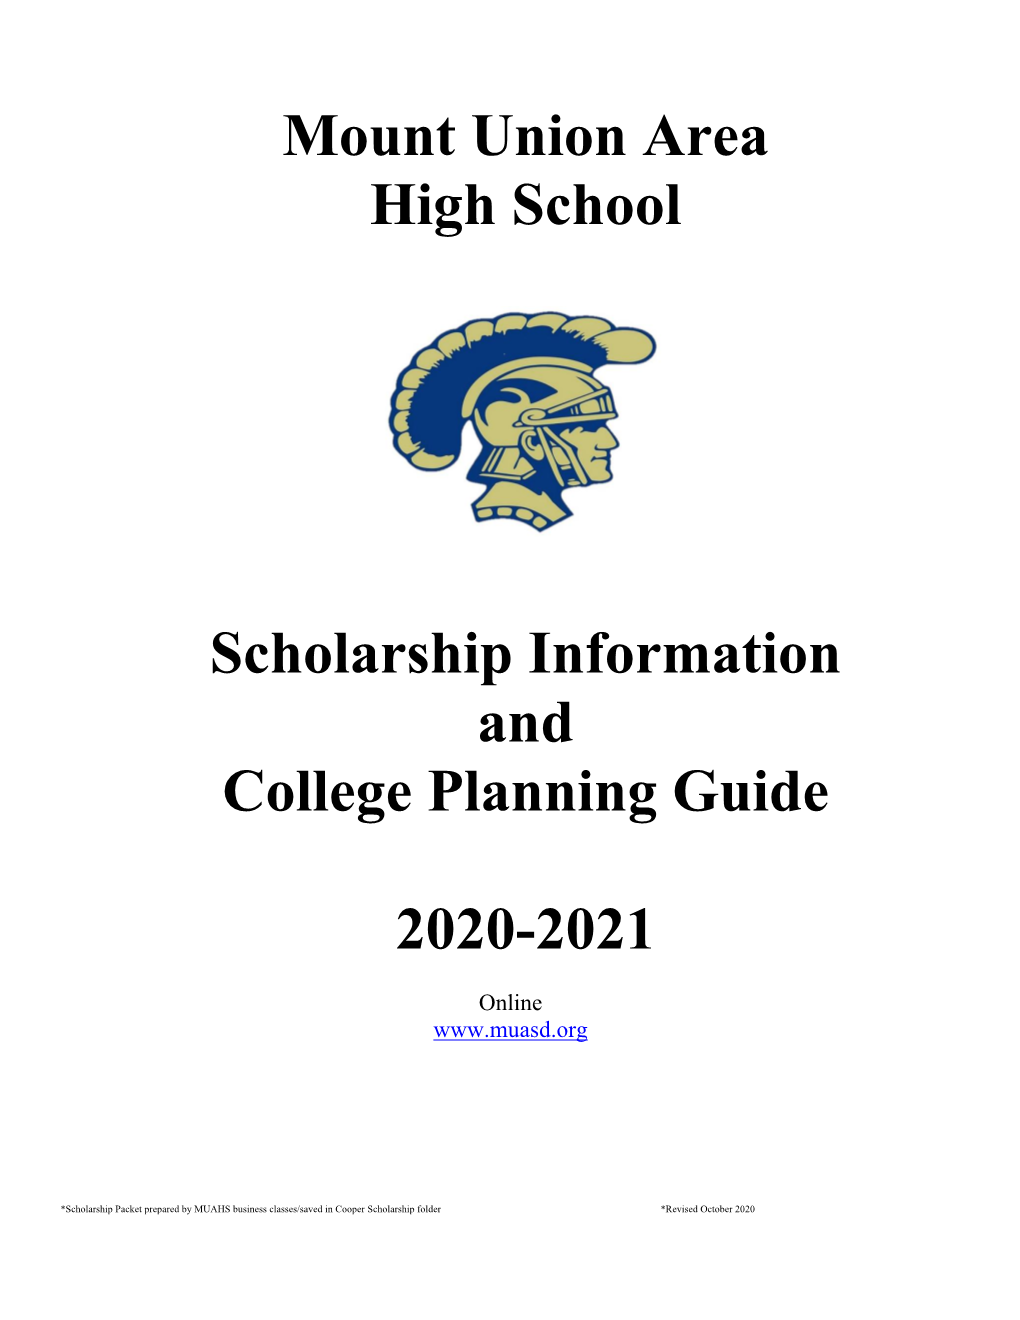 Scholarship Information and College Planning Guide